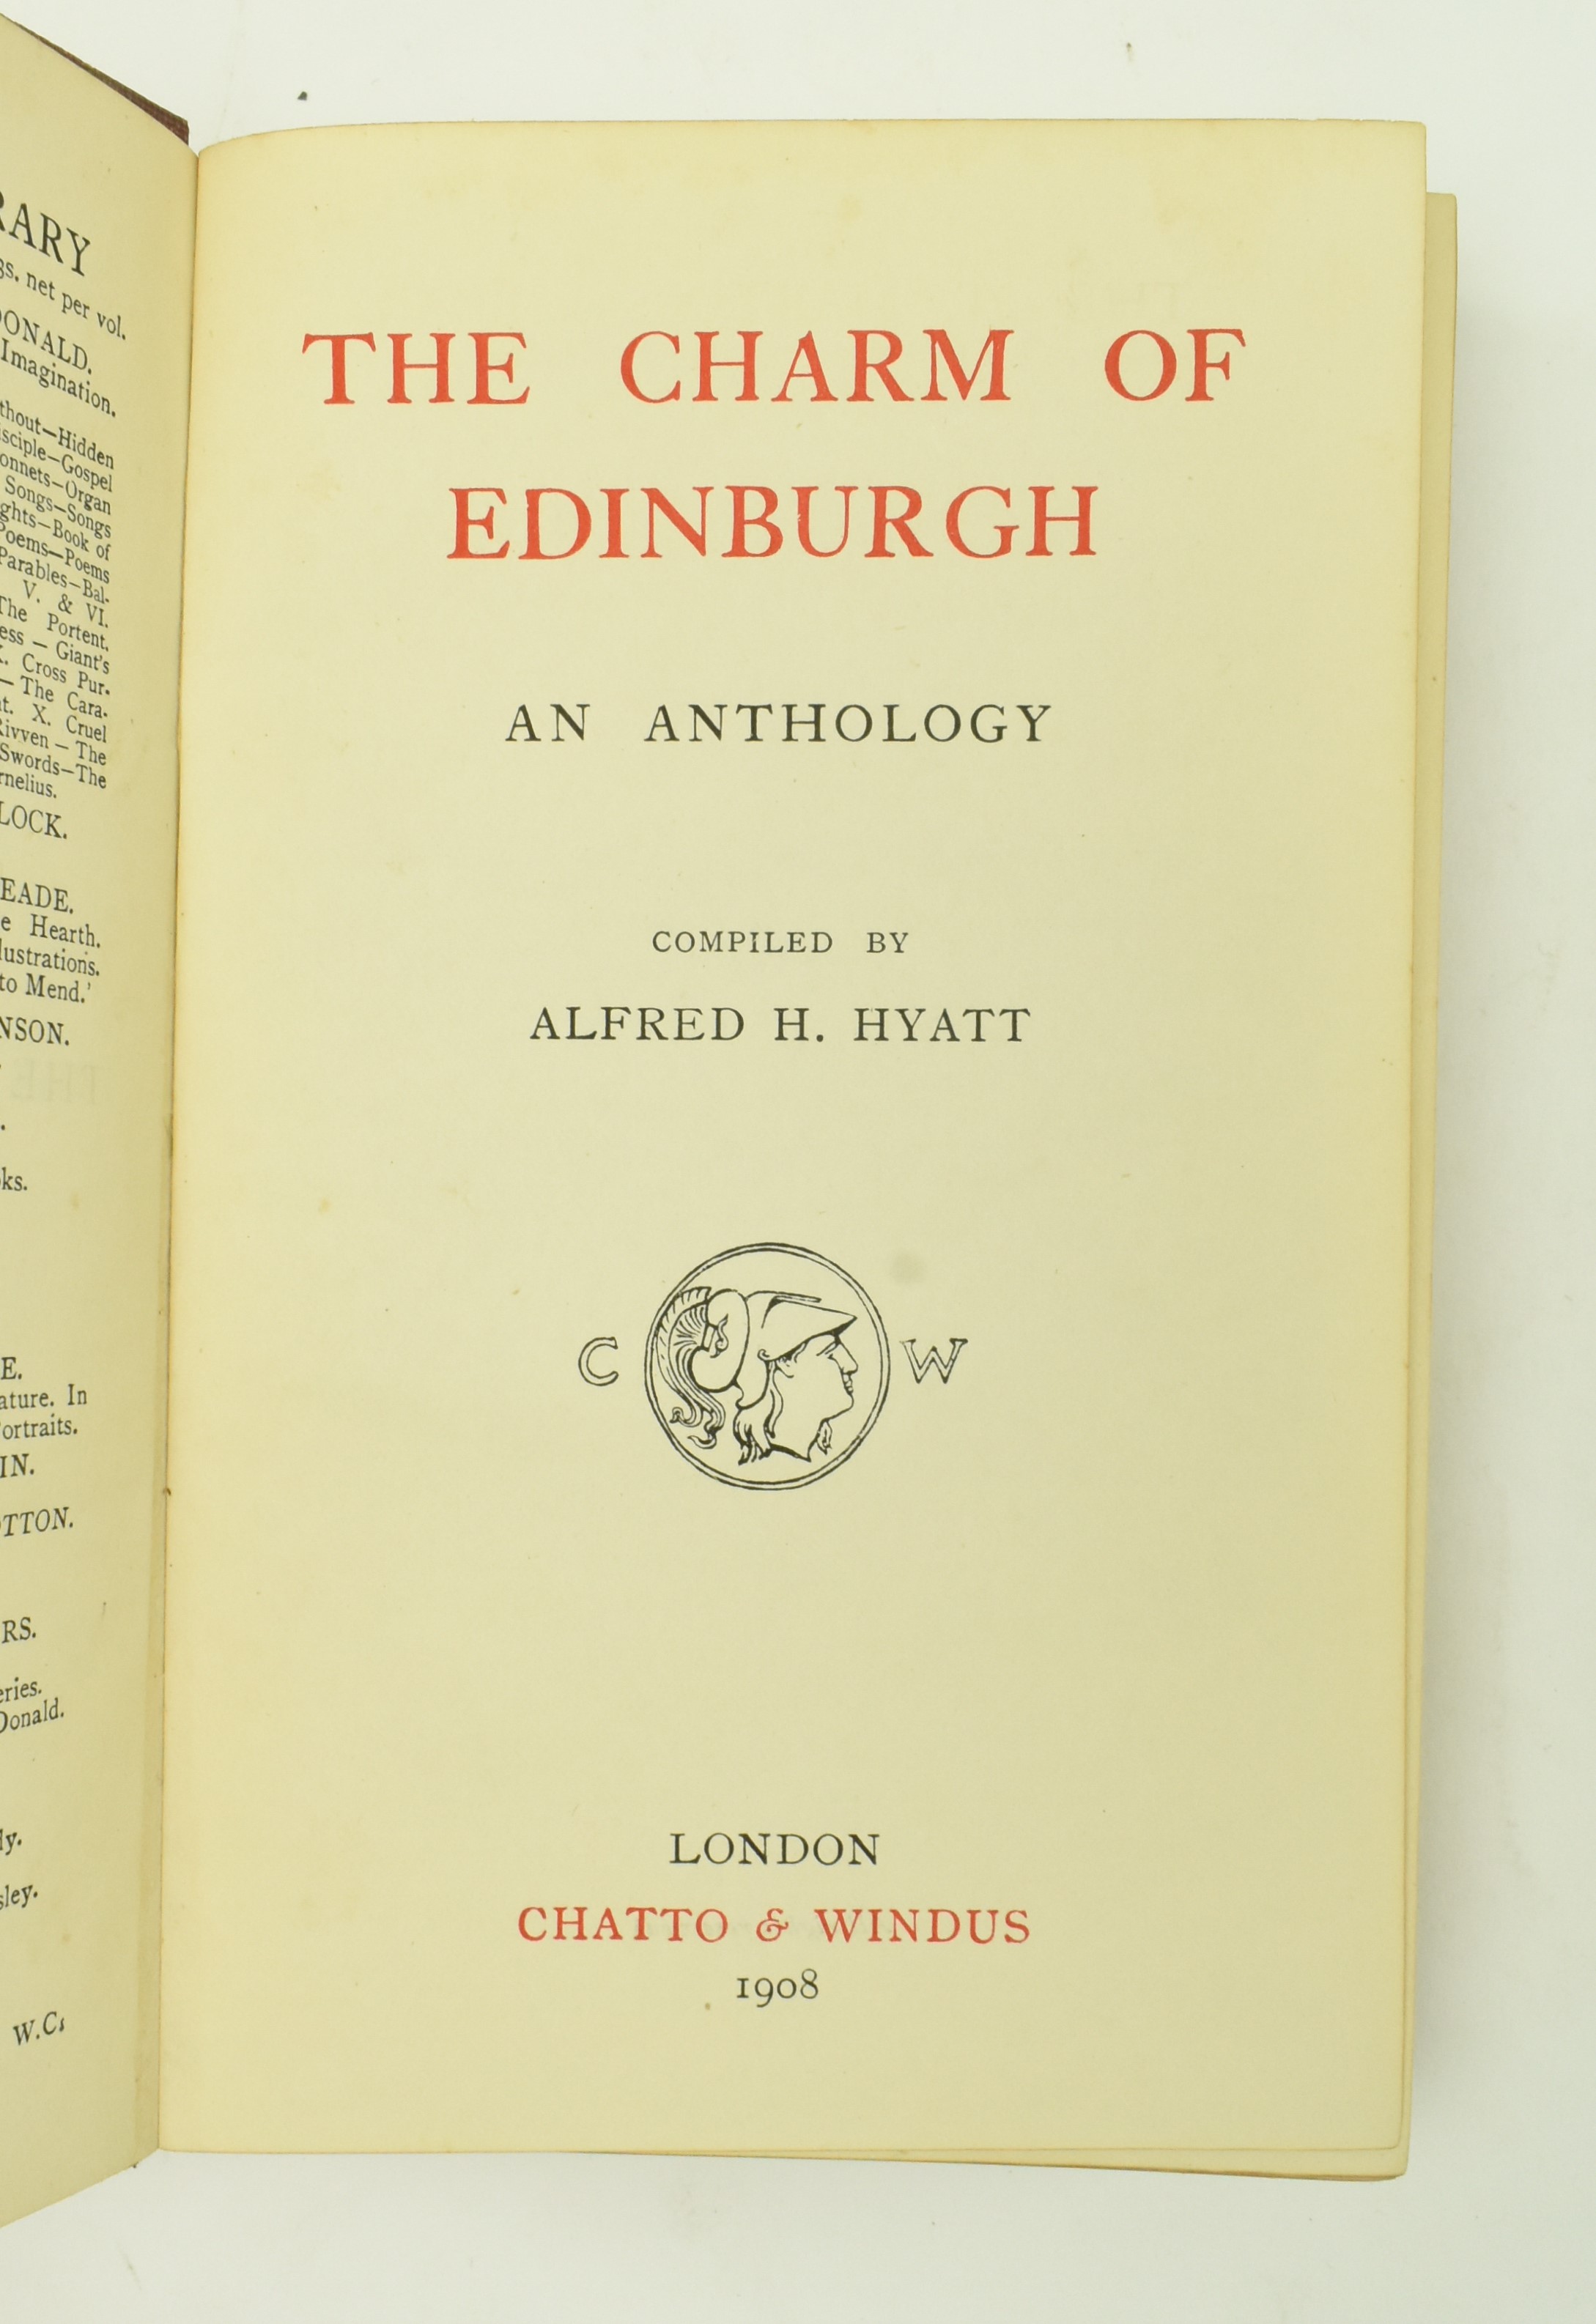 SCOTTISH HISTORY. COLLECTION OF BOOKS RELATING TO SCOTLAND - Image 8 of 10